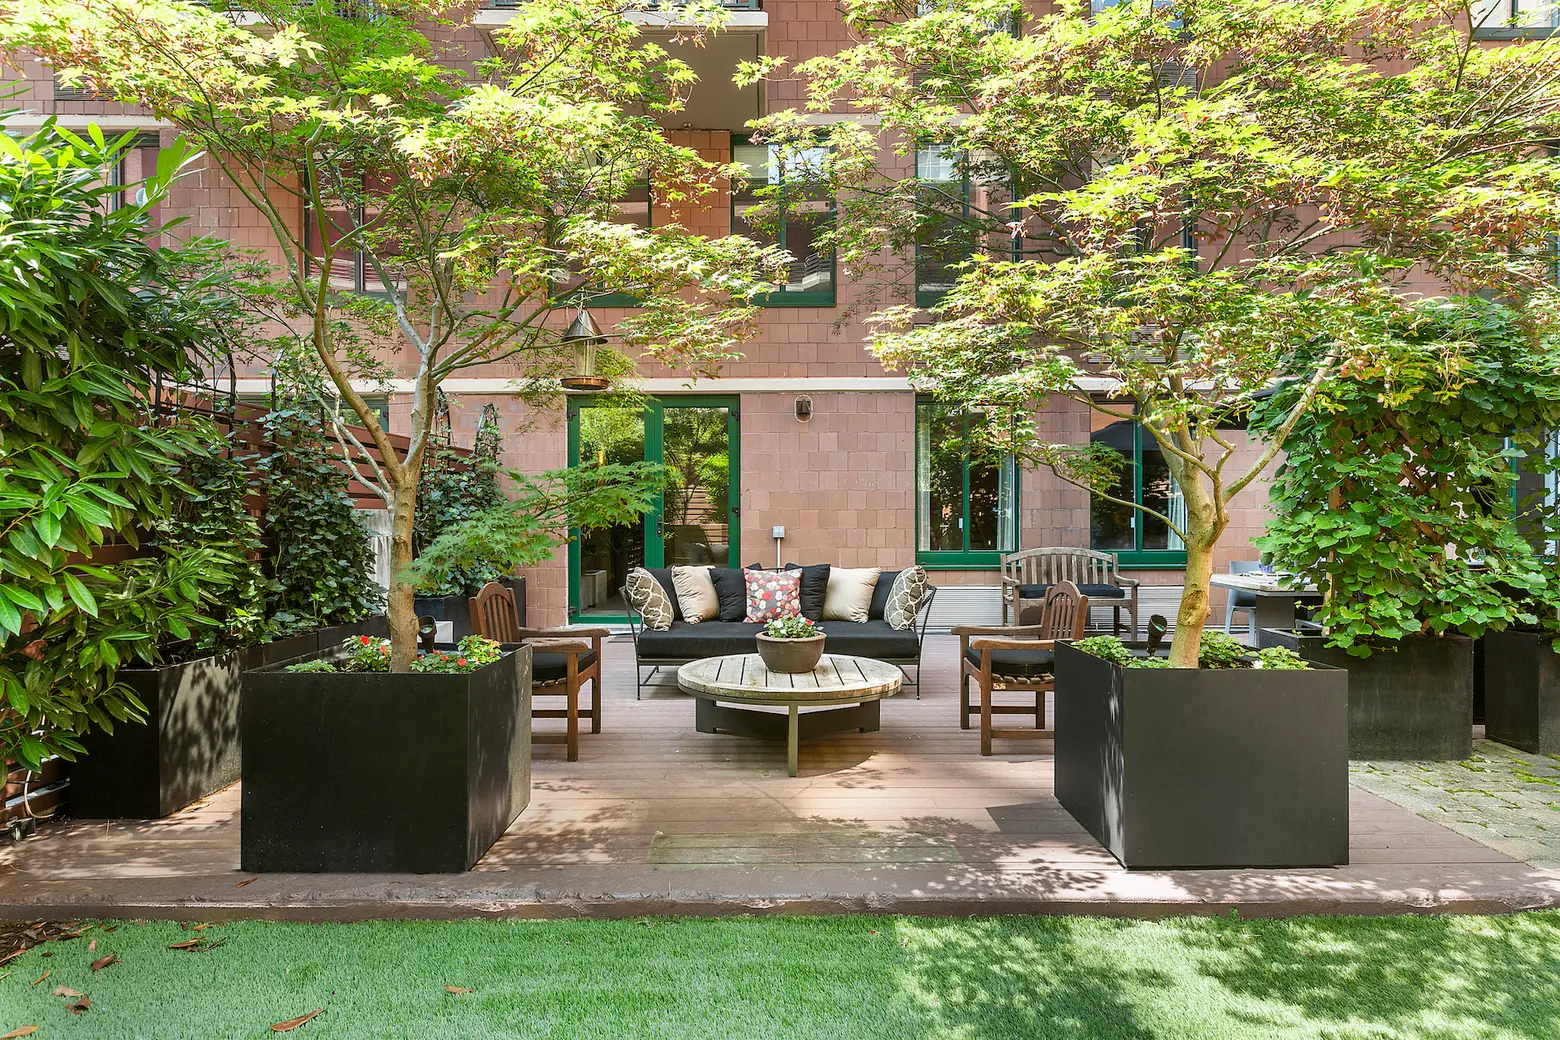 $4M Battery Park City condo is a slice of suburbia with a two-car driveway and private backyard